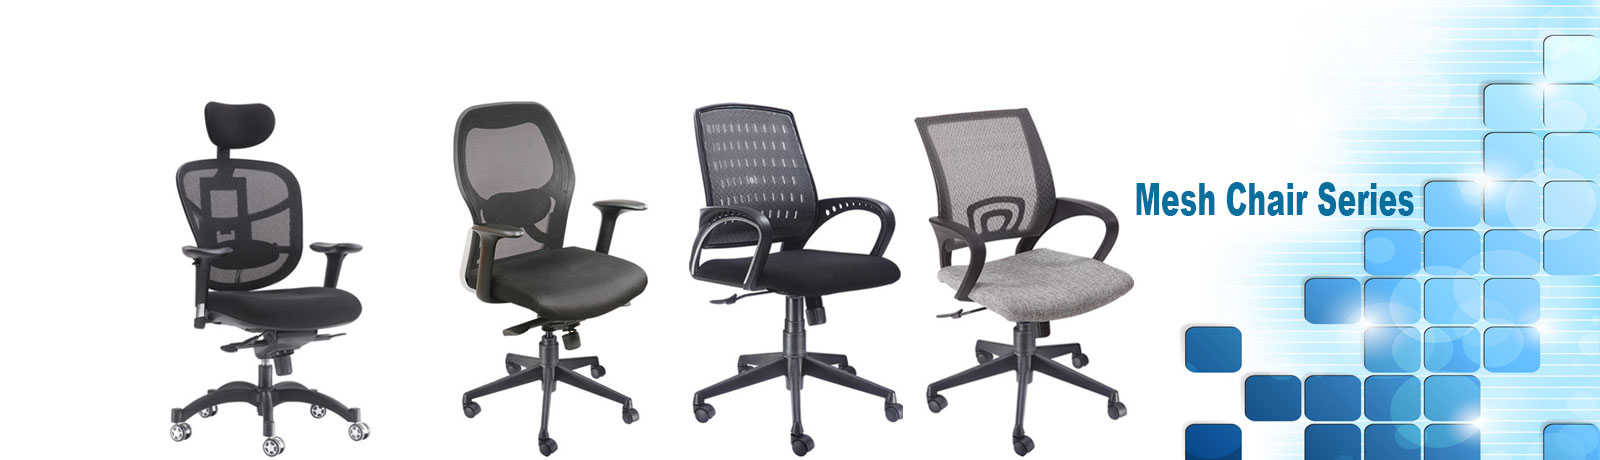 Mesh Chairs Manufacturer in Noida India